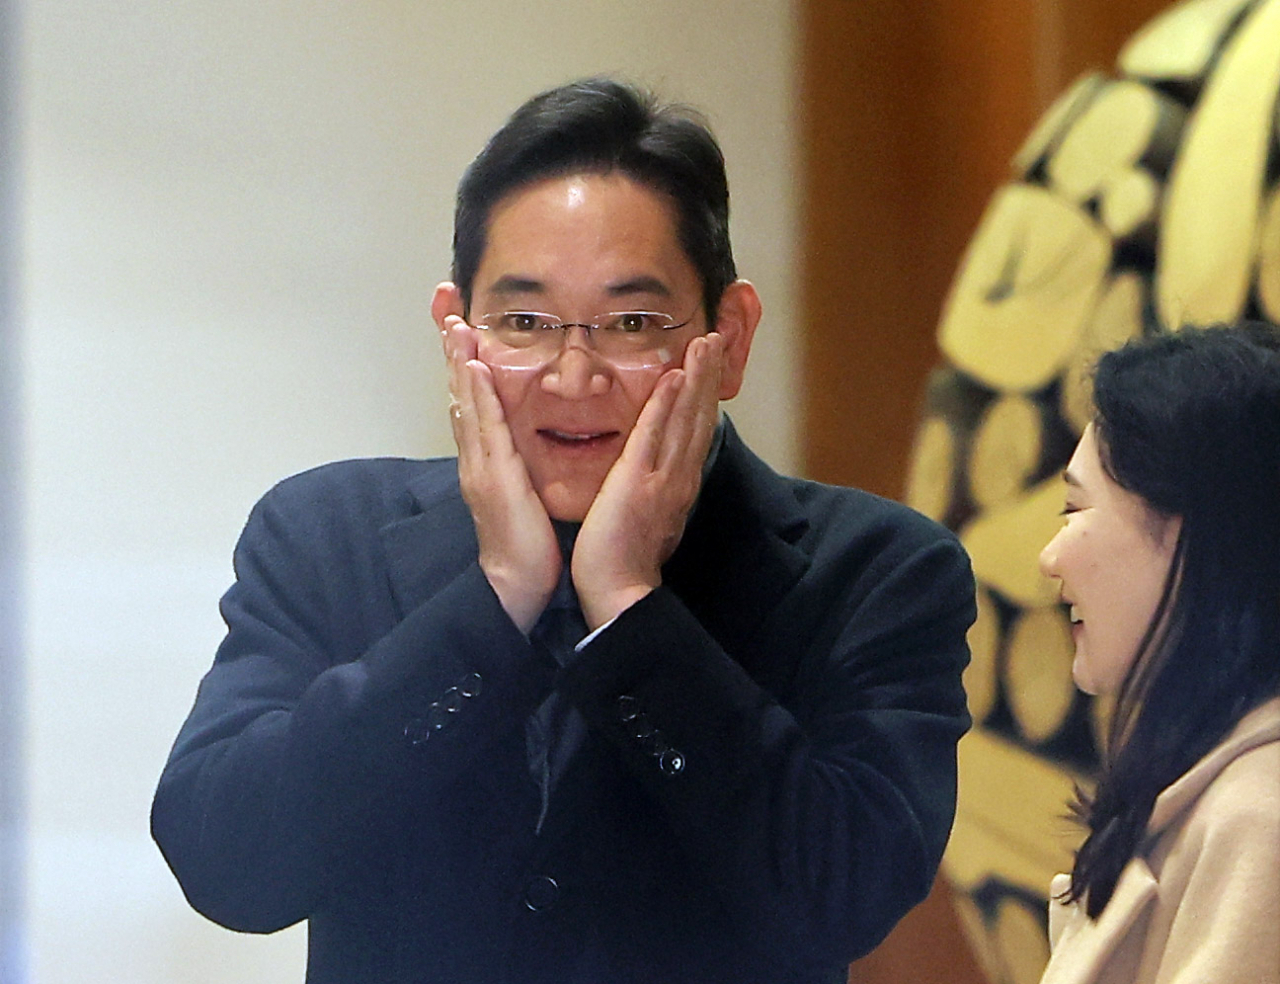 Samsung Electronics Chairman Lee Jae-yong speaks to a reporter at Gimpo International Airport upon returning from his trip to the Netherlands, on Friday. (Yonhap)